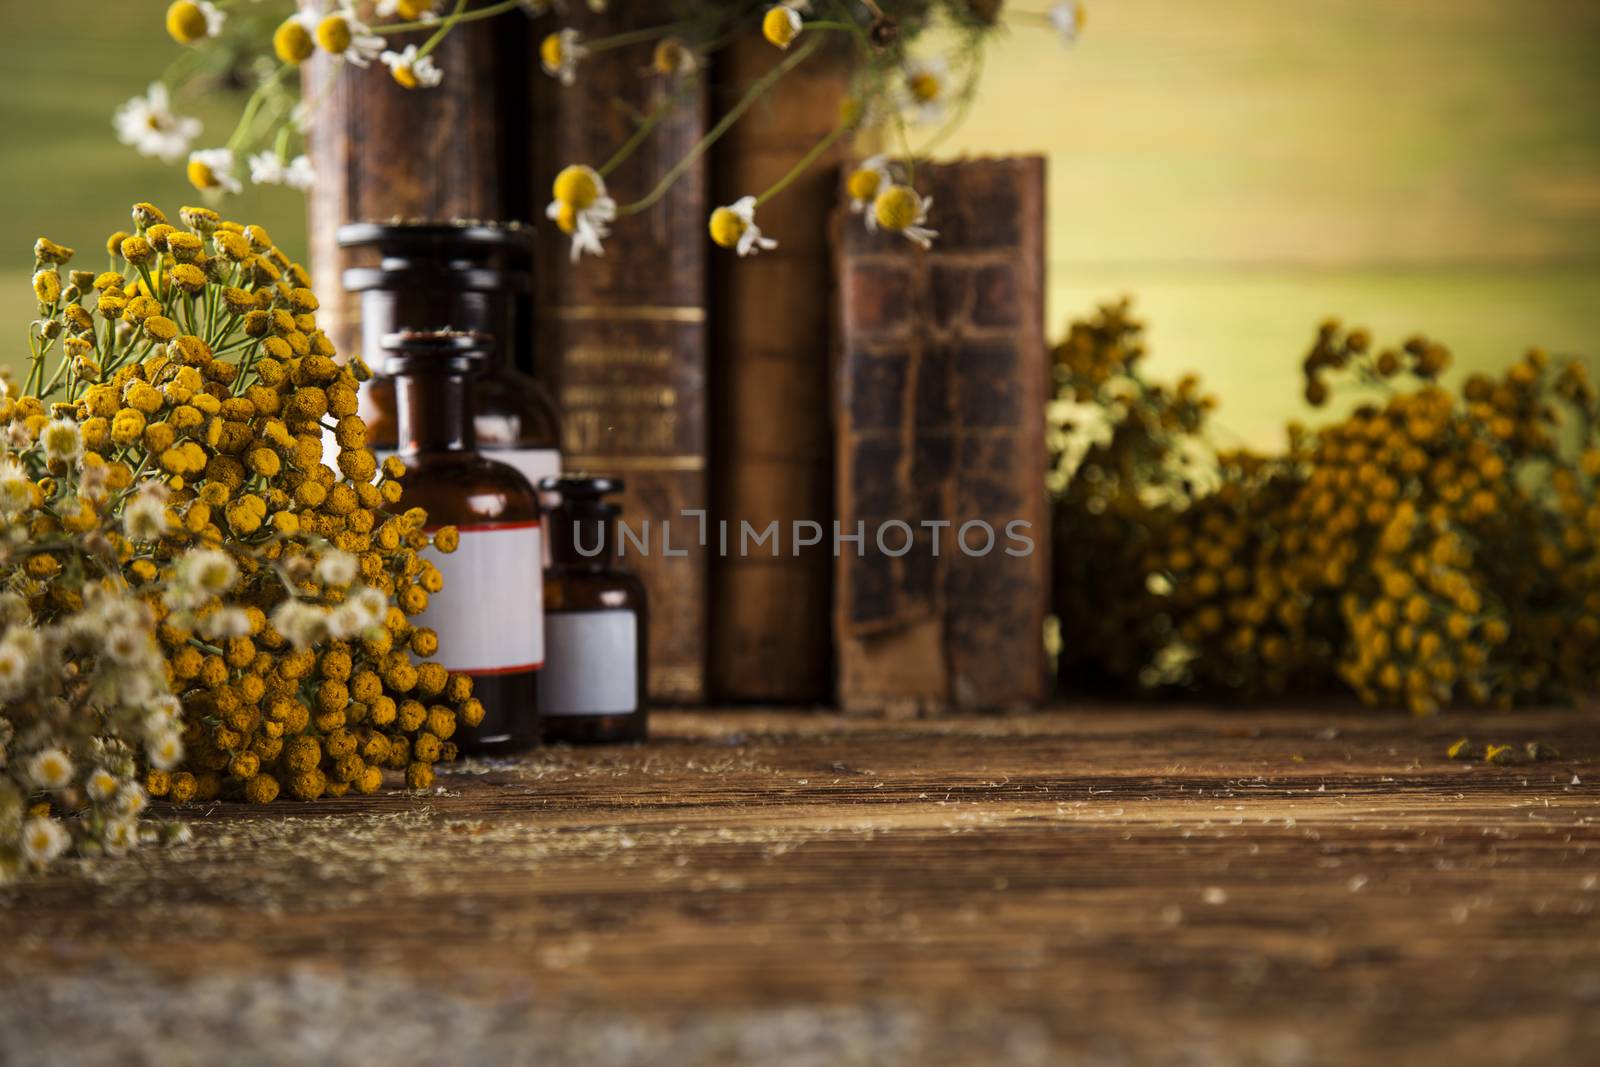 Book and Herbal medicine on wooden table background